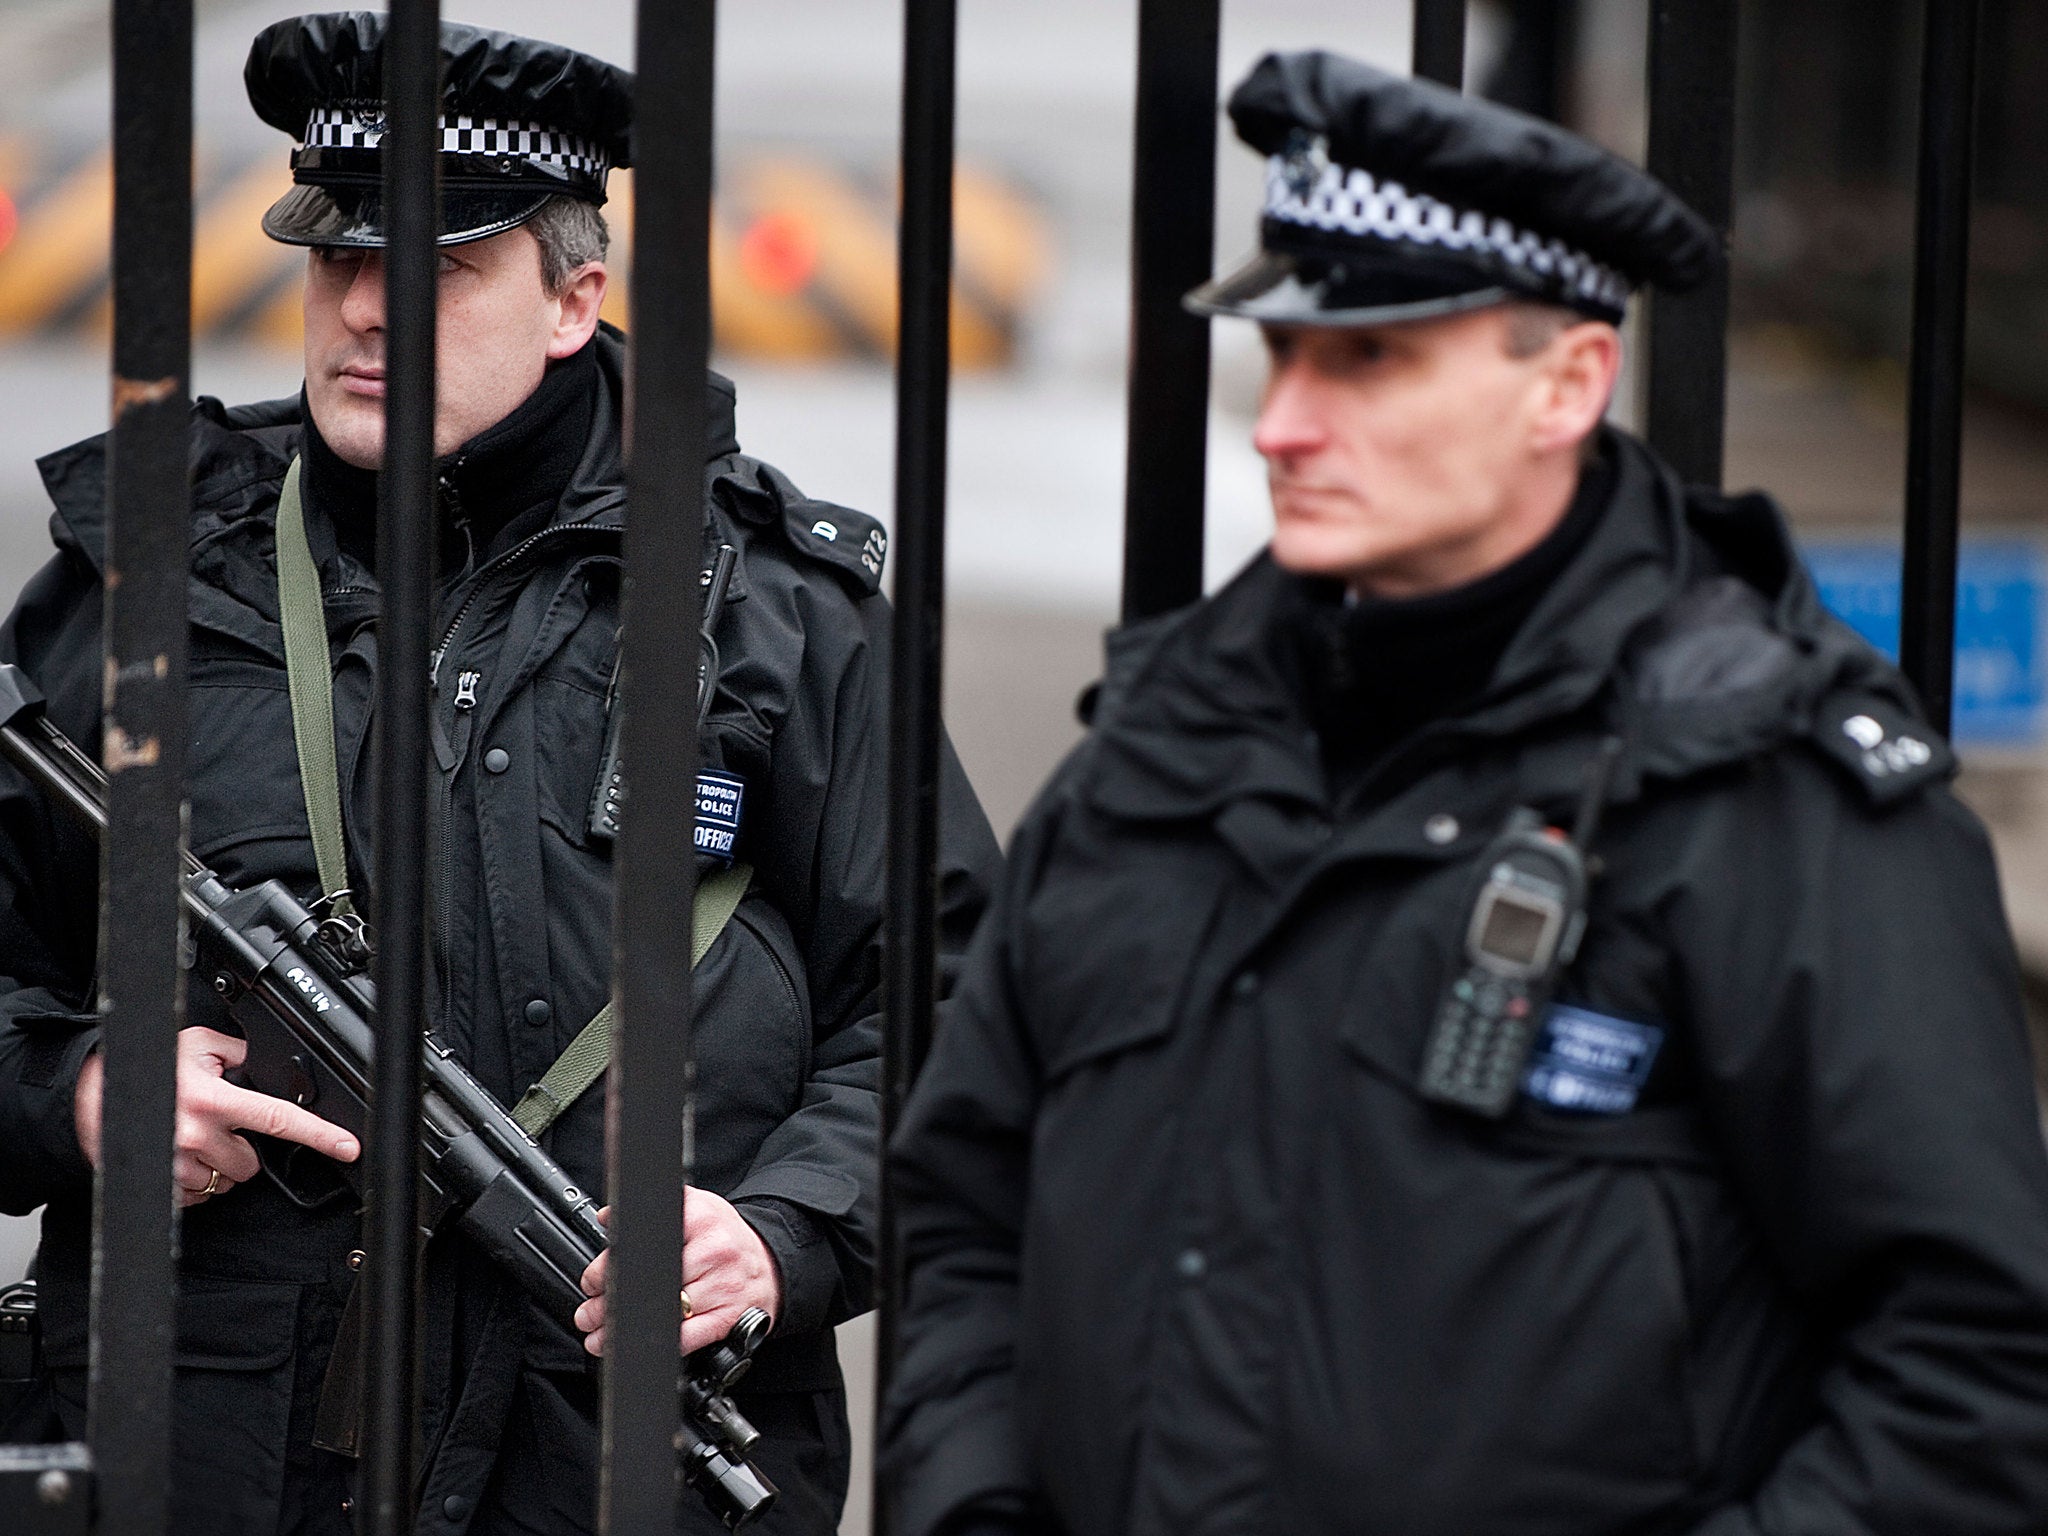 Armed policemen stand guard at the gates of Downing Street. Experts say the threat to Britain has 'diversified' and become 'more intense' - but that the UK security services have adapted their responses as a result